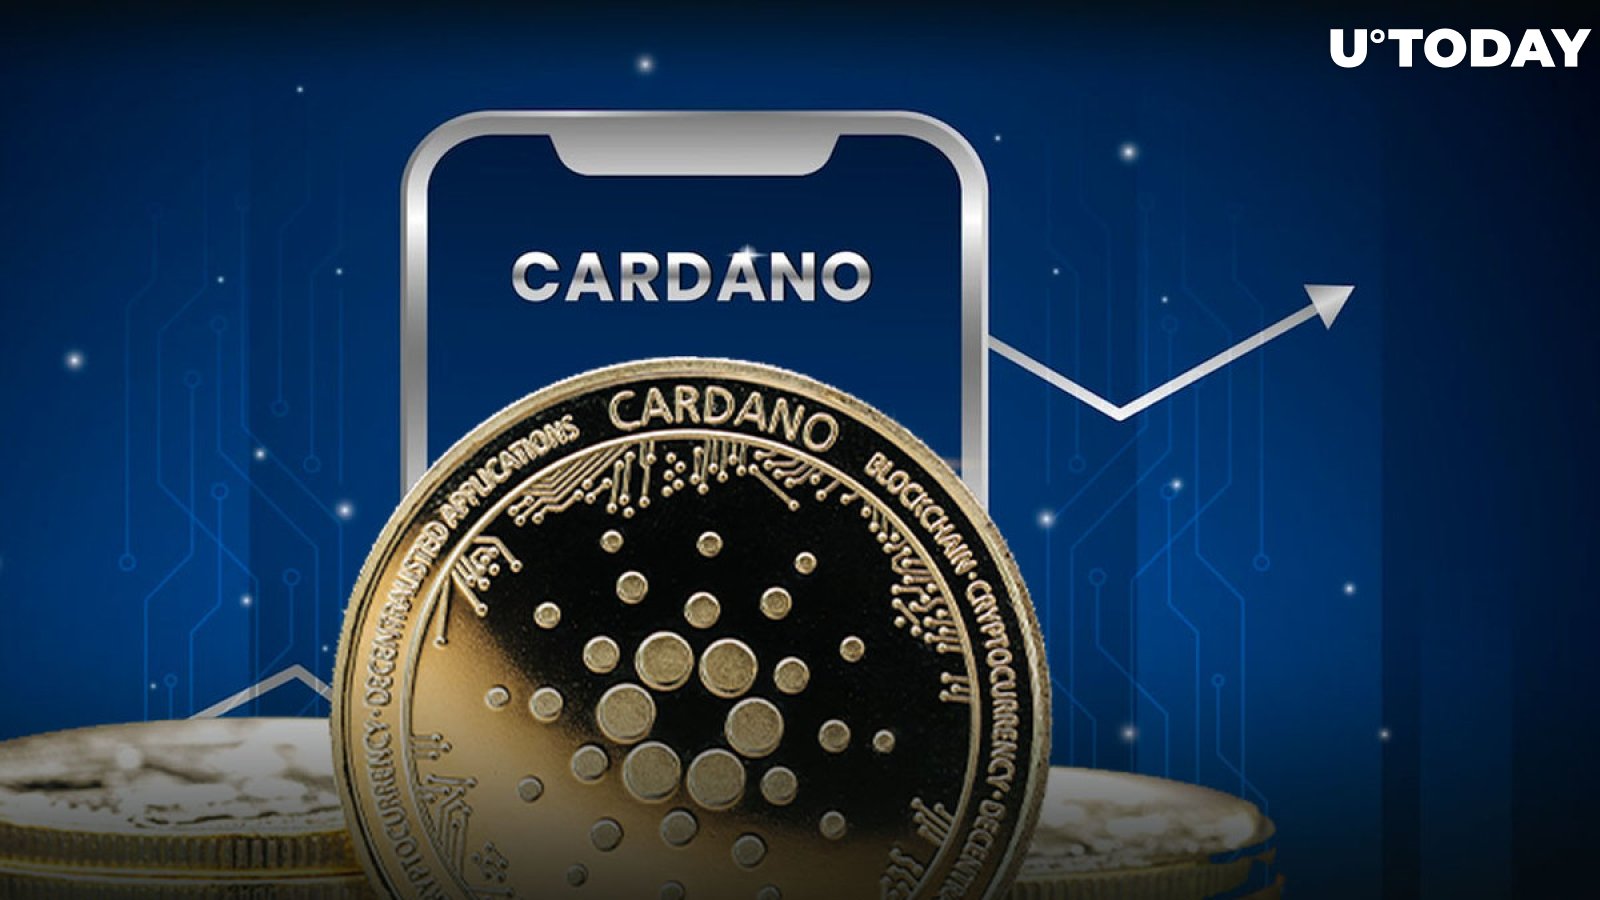 Cardano Hit 13,000 GitHub Commits in June, Becomes Most Developed Project in Crypto Industry